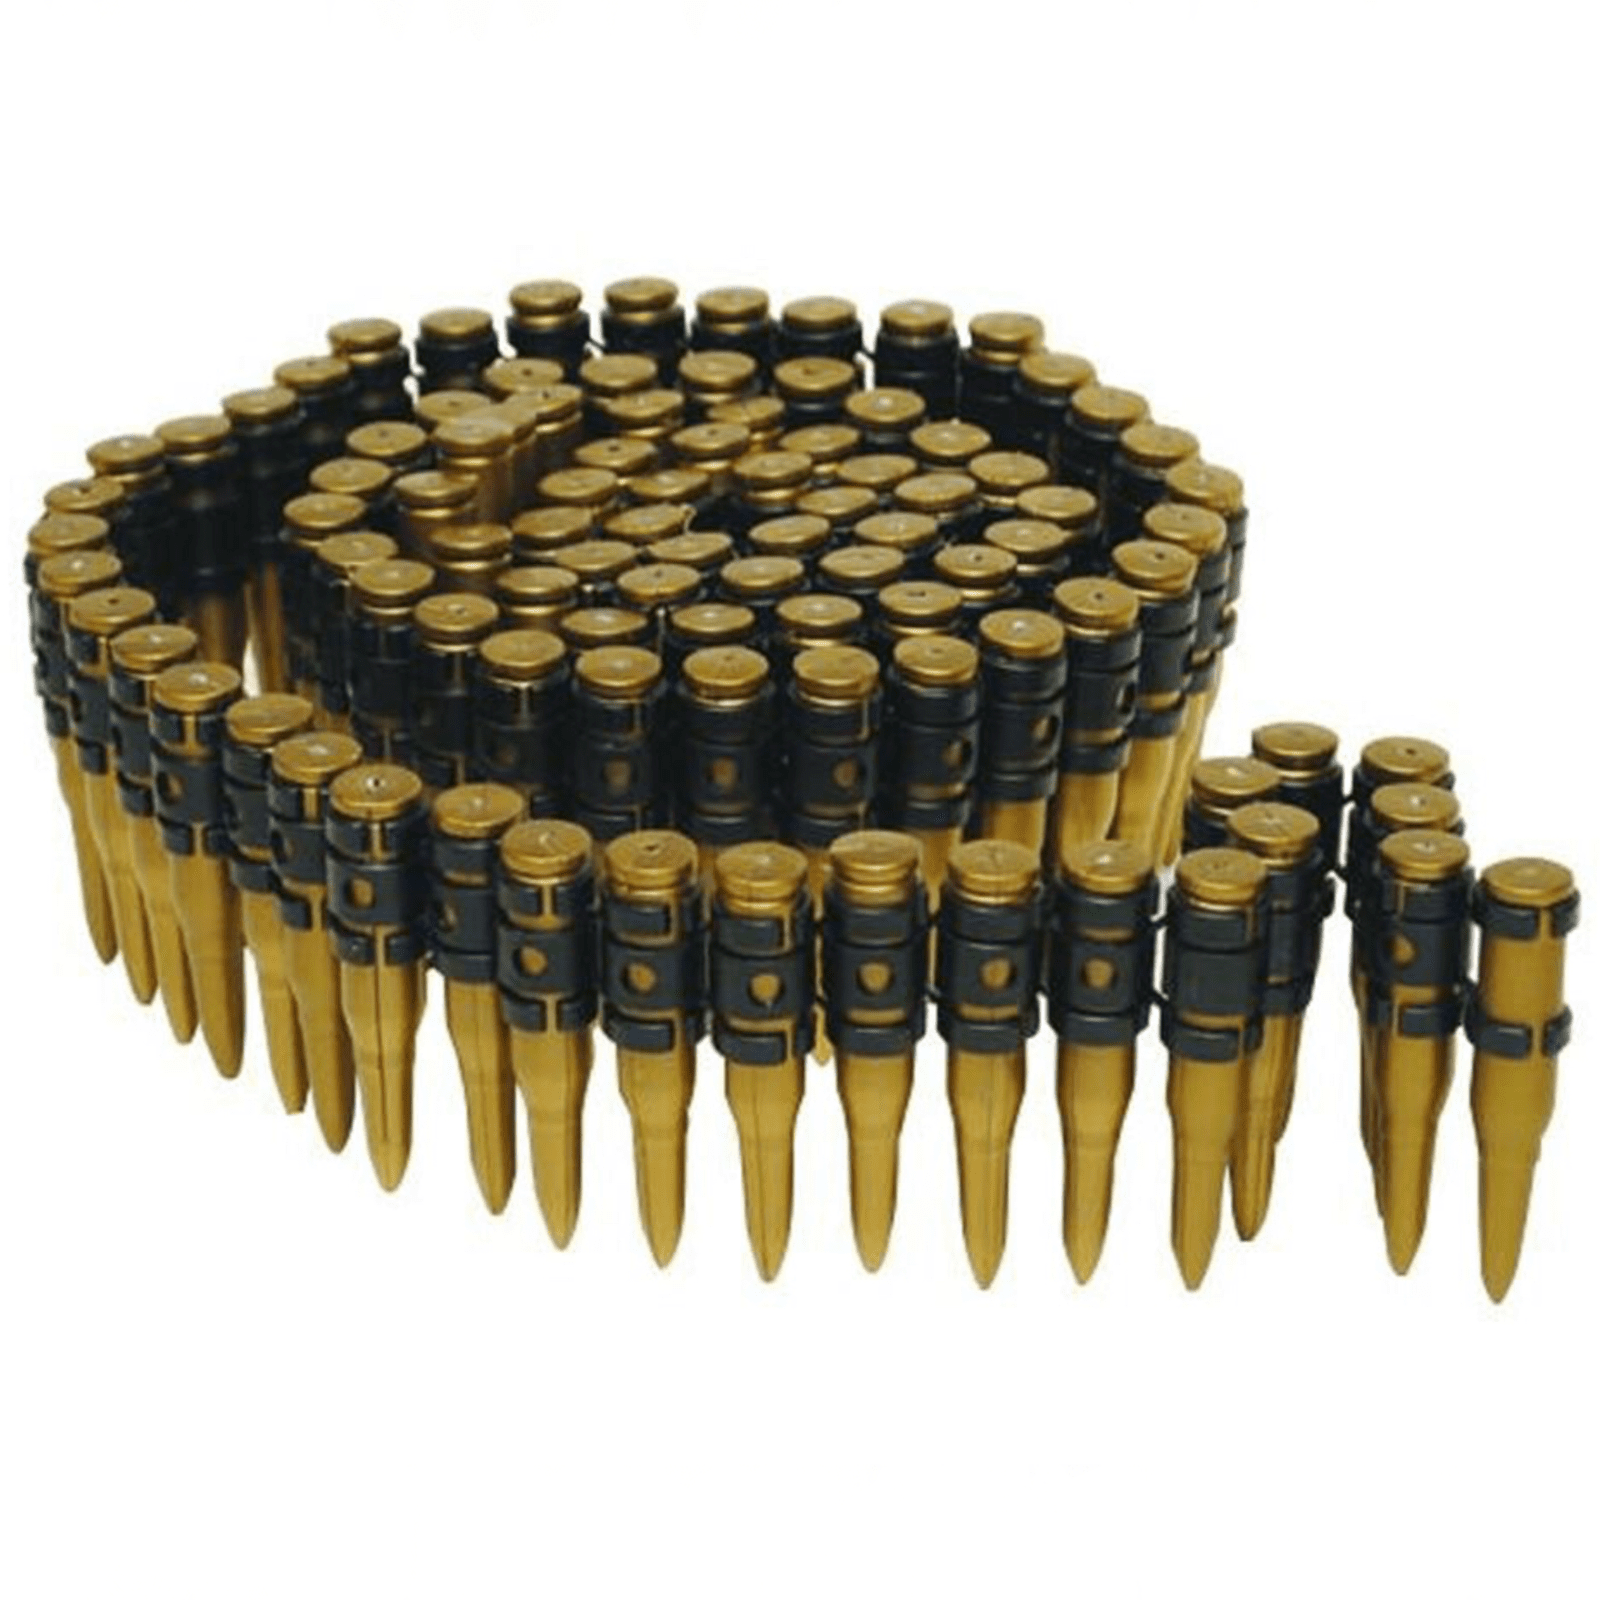 Featured image for “Bandolier (String of Bullets)”